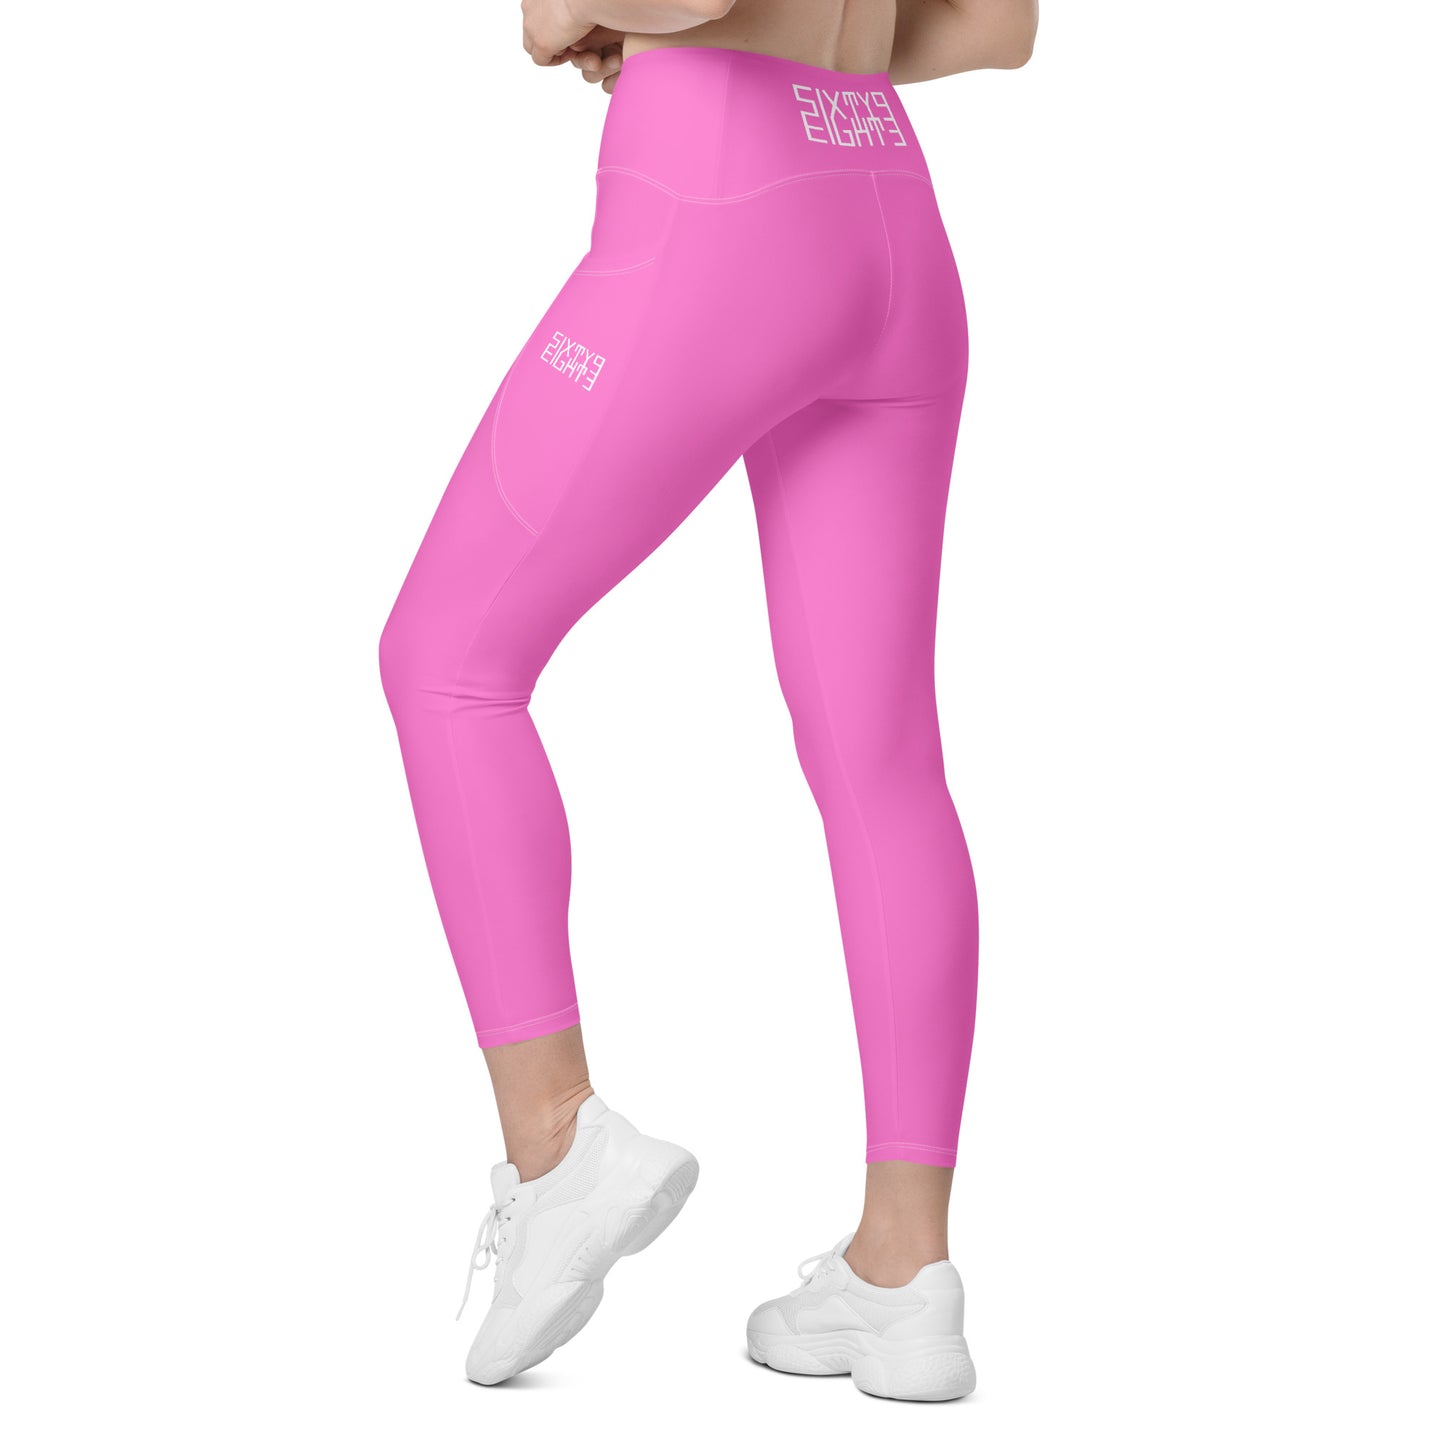 Sixty Eight 93 Logo White Pink Crossover Leggings with pockets